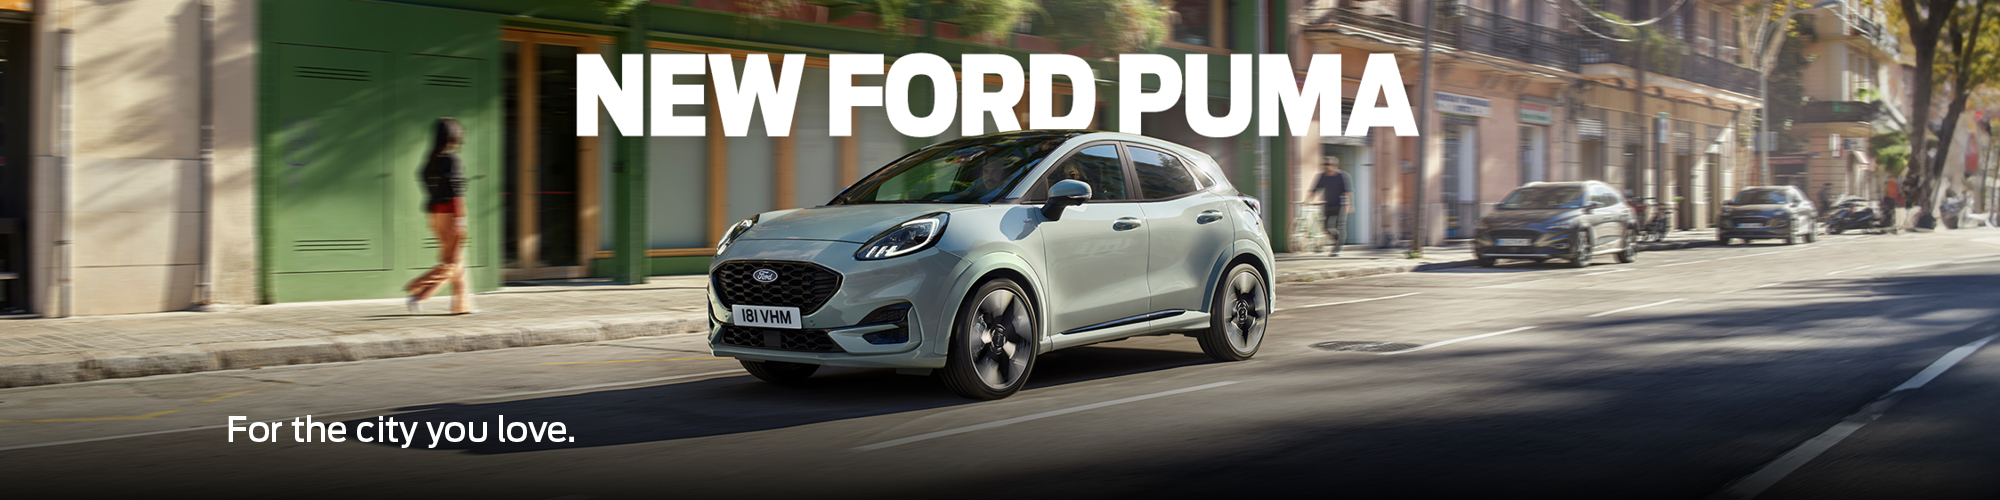 New Ford Puma Top Banner